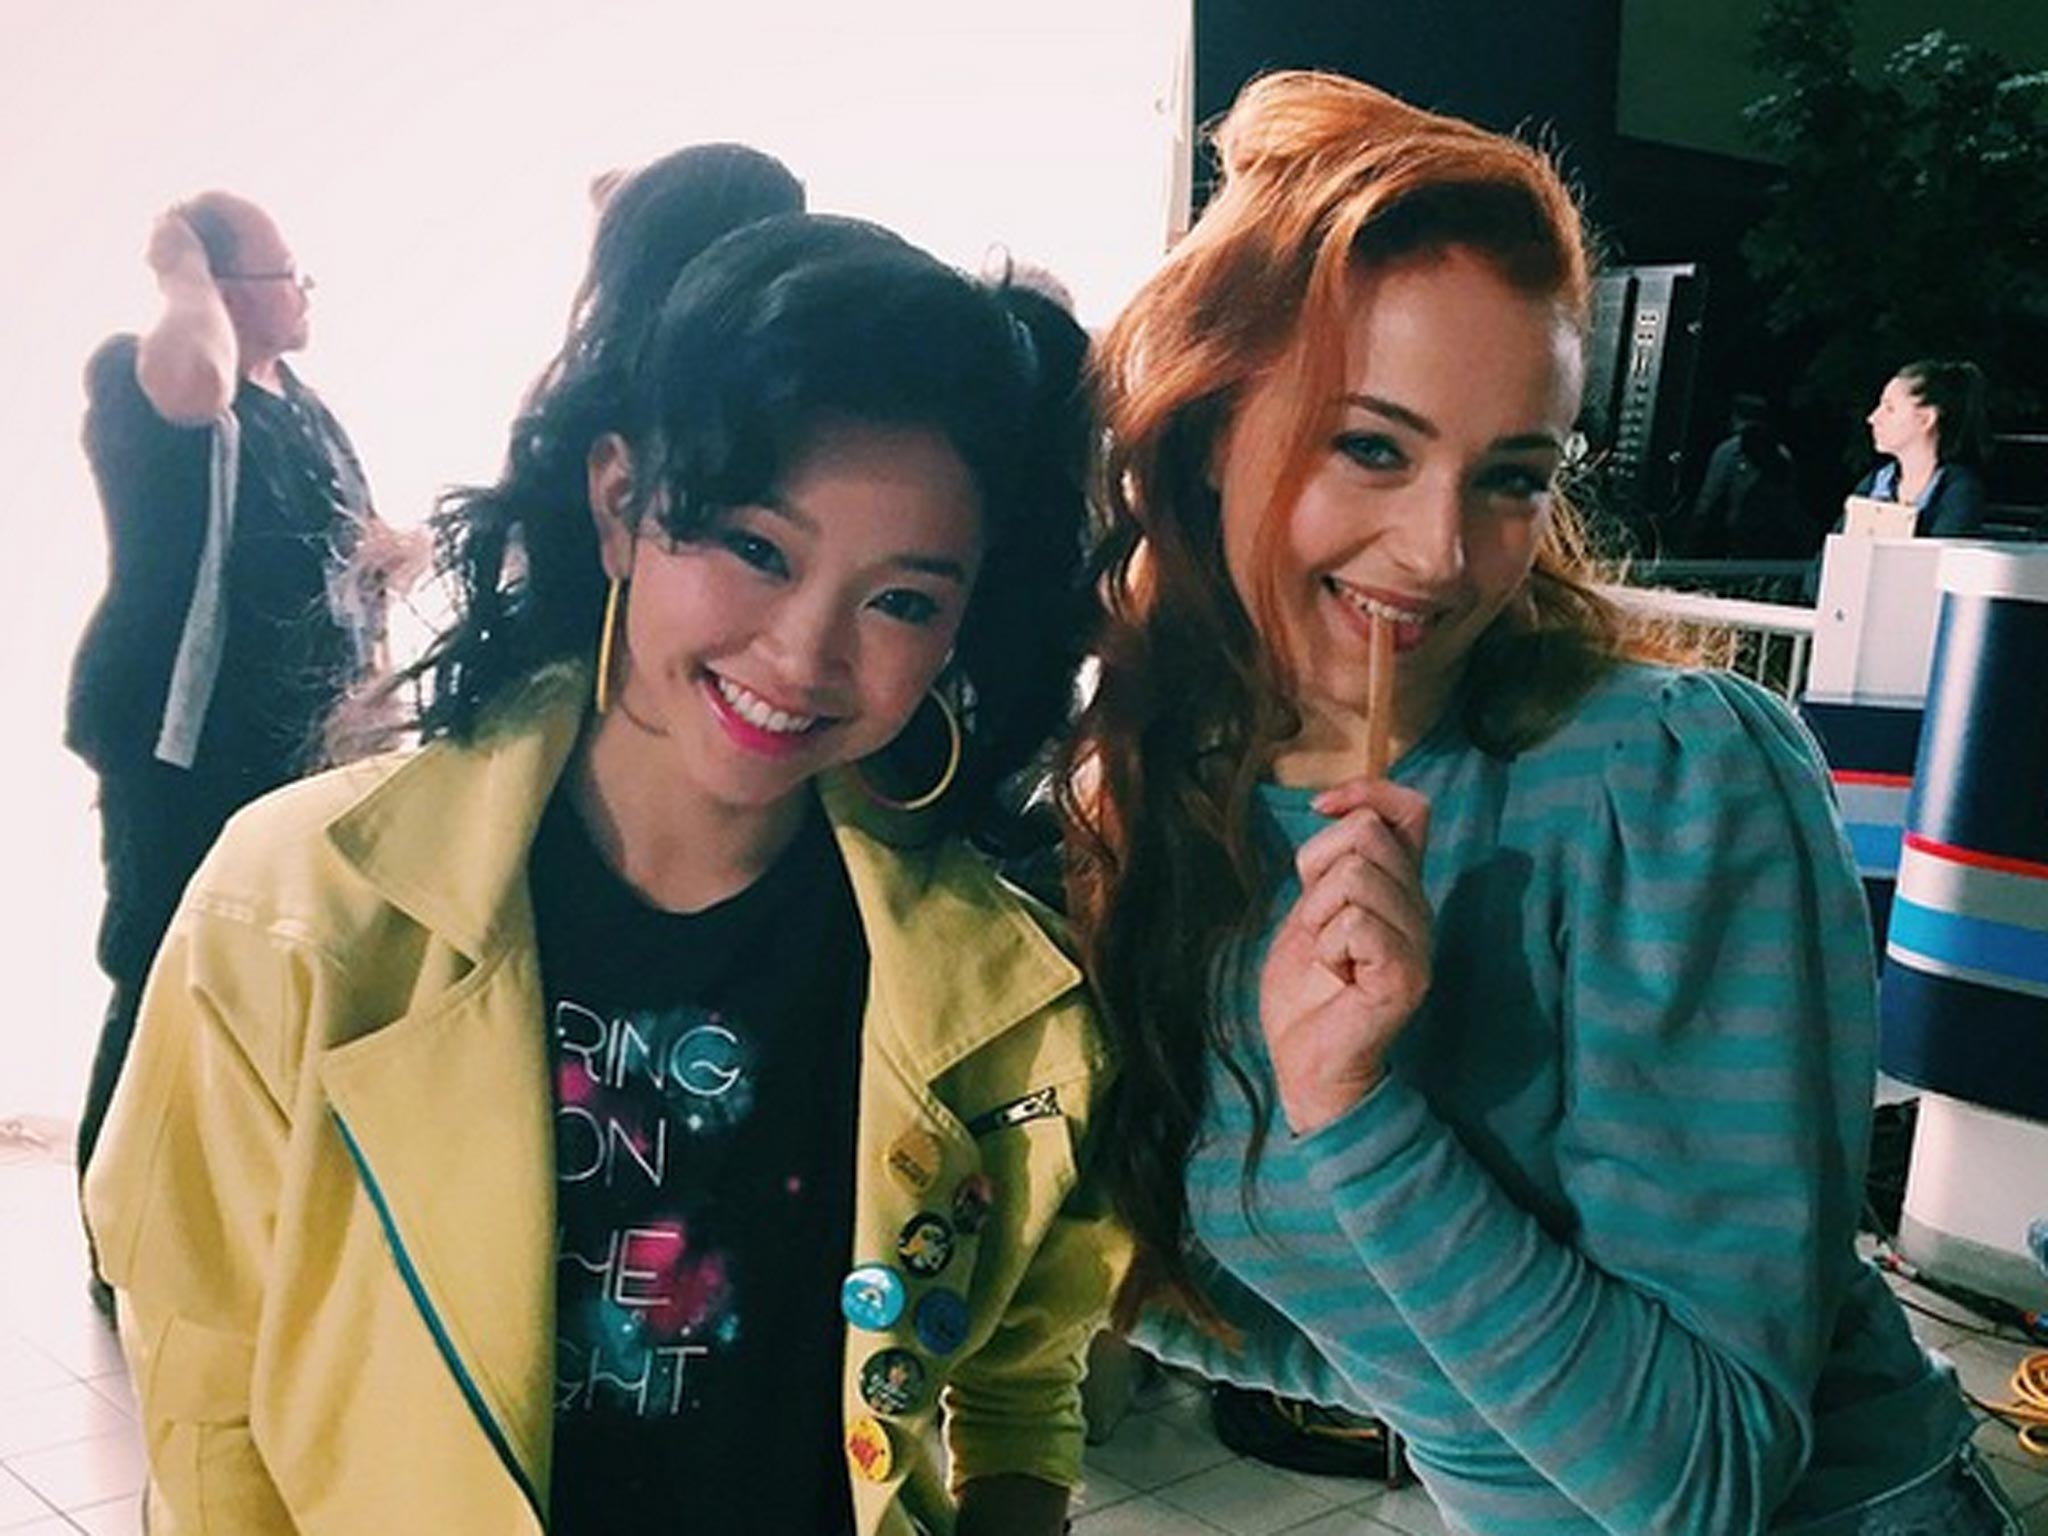 Lana Condor and Sophie Turner on the set of the new X-Men film